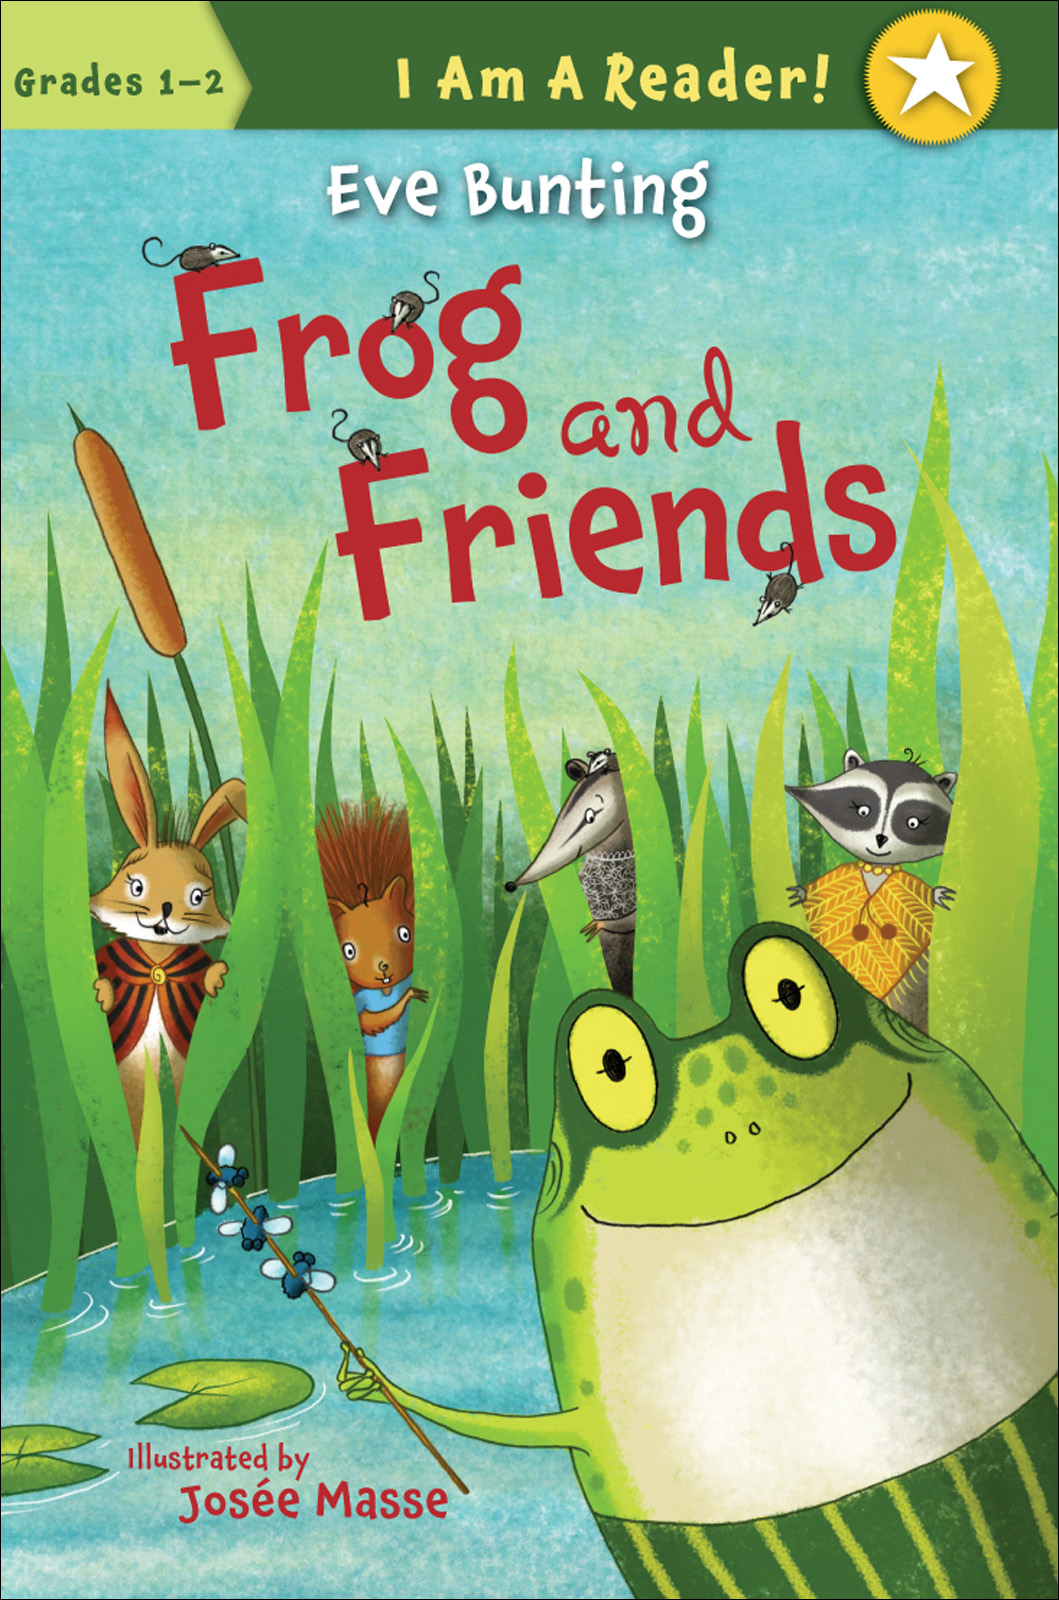 Frog and Friends (2010) by Eve Bunting